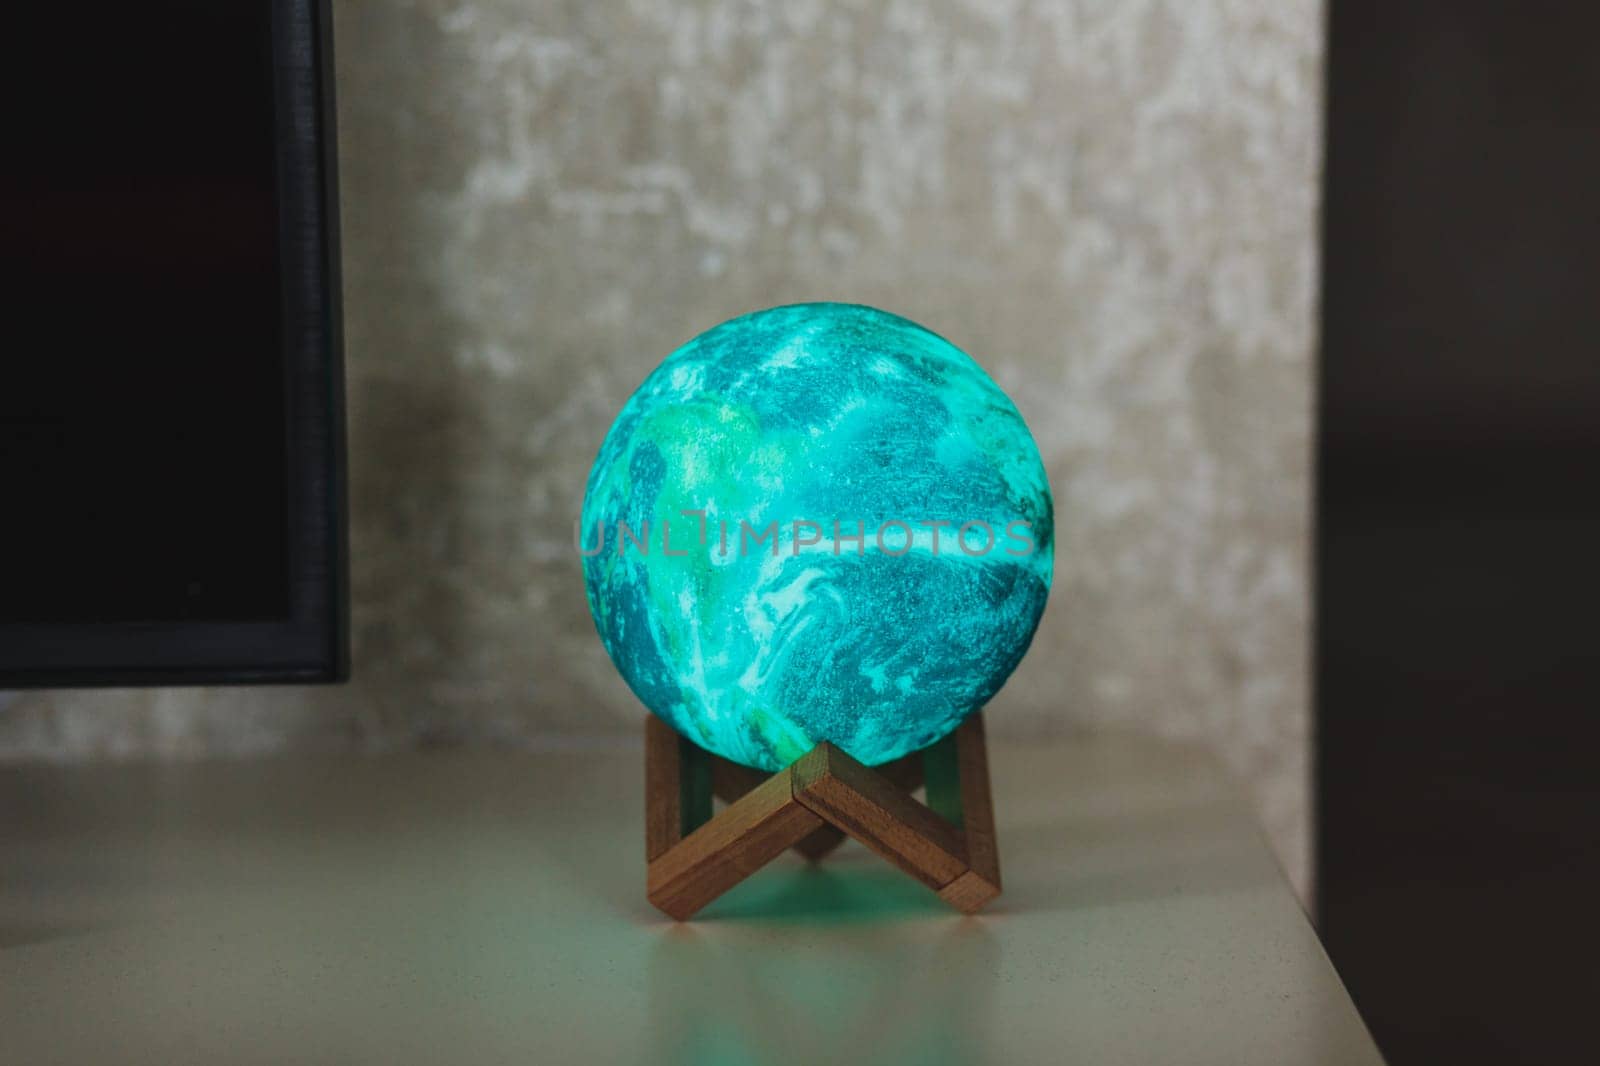 planet or moon lamp stands on the table. round night light